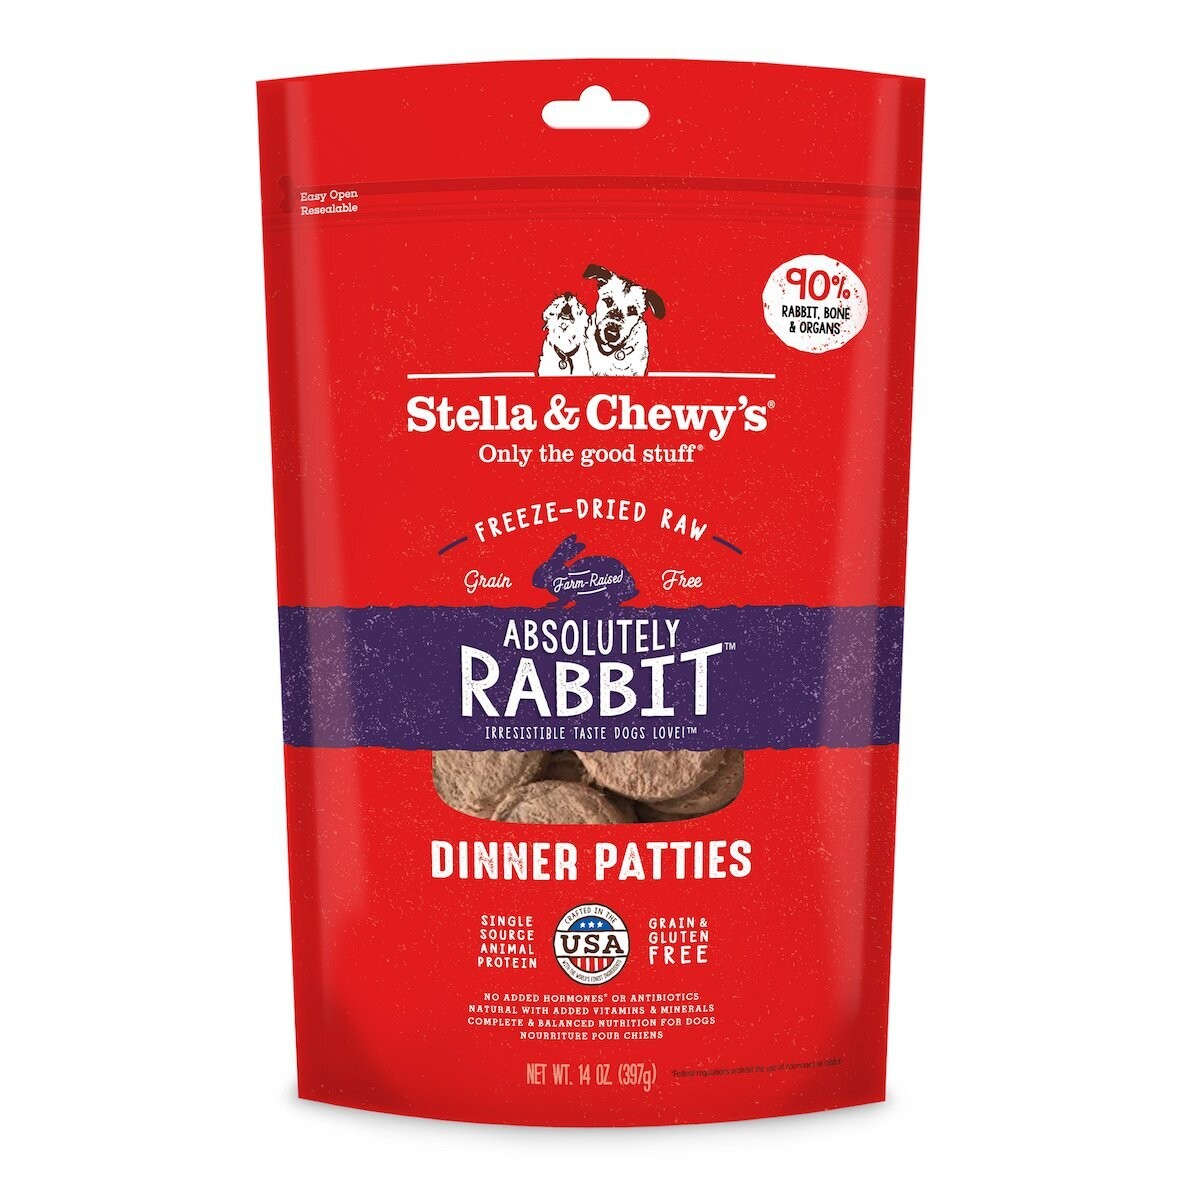 Absolutely Rabbit Dinner Patties - Stella & Chewy